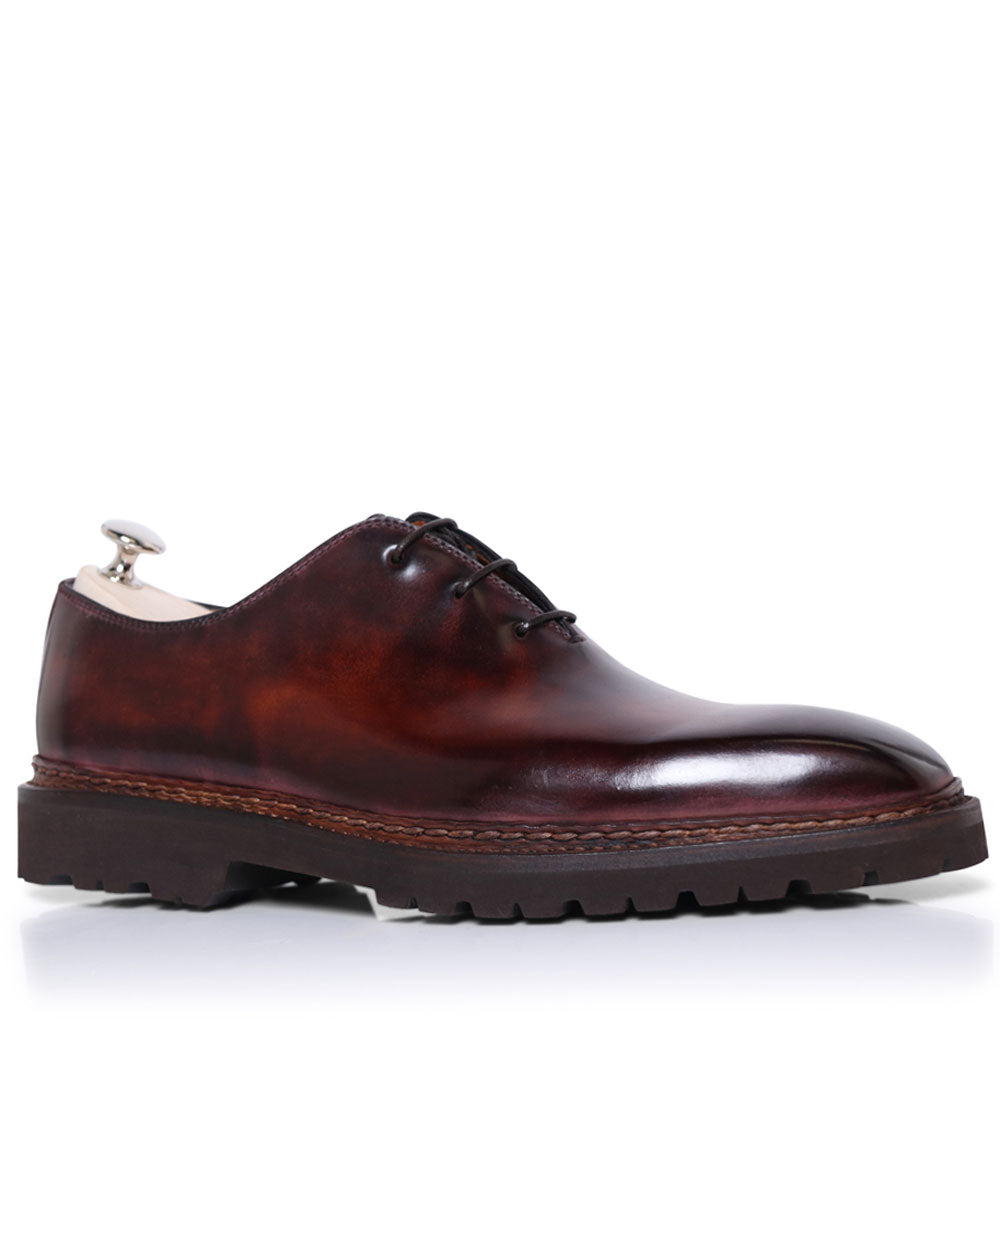 Matton Scuro Leather Lace Up Shoe with Lug Sole in Dark Chocolate